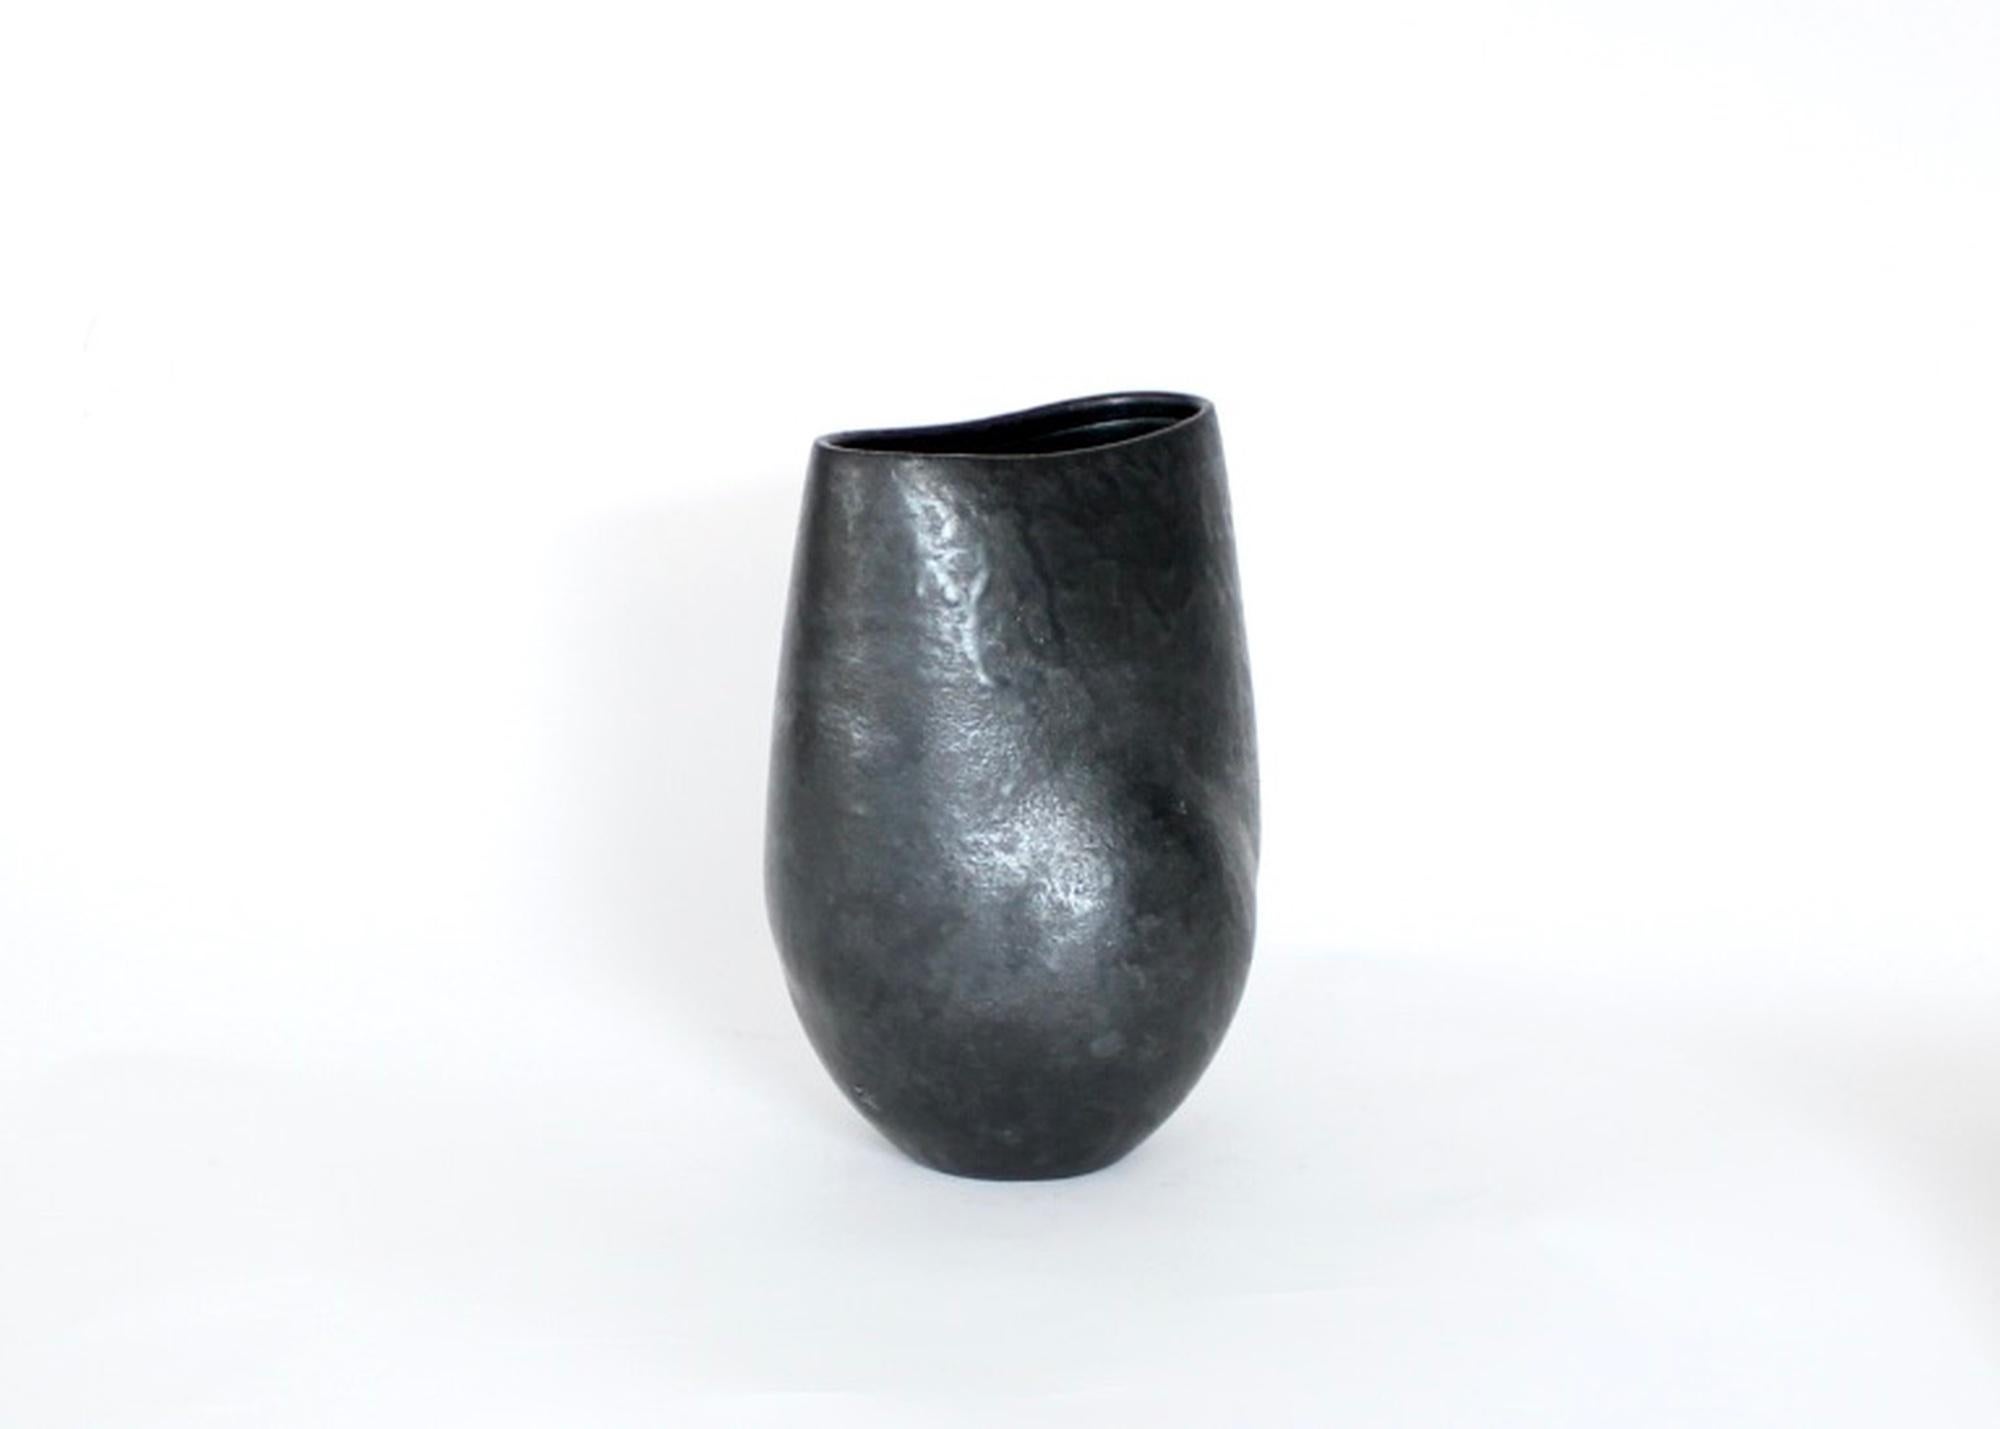 A low ceramic vase by French artist Andre Bloch. Bloch uses a heavily grogged clay and deep black glaze to create his unique forms. Circa 2010
